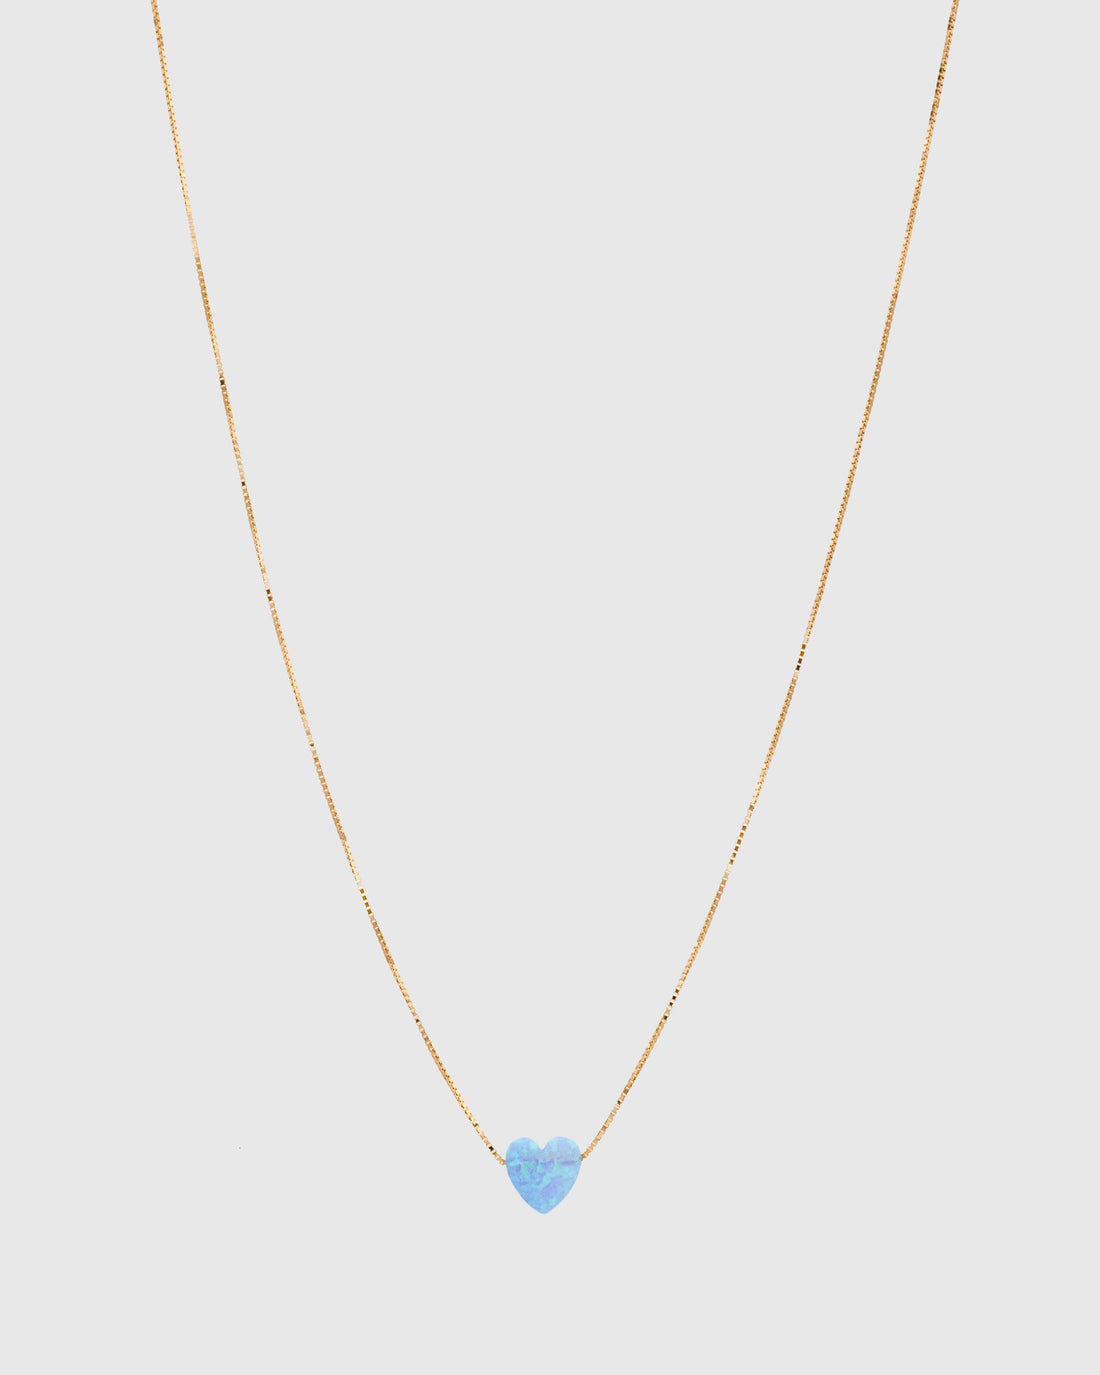 Turquoise Opal Heart Necklace